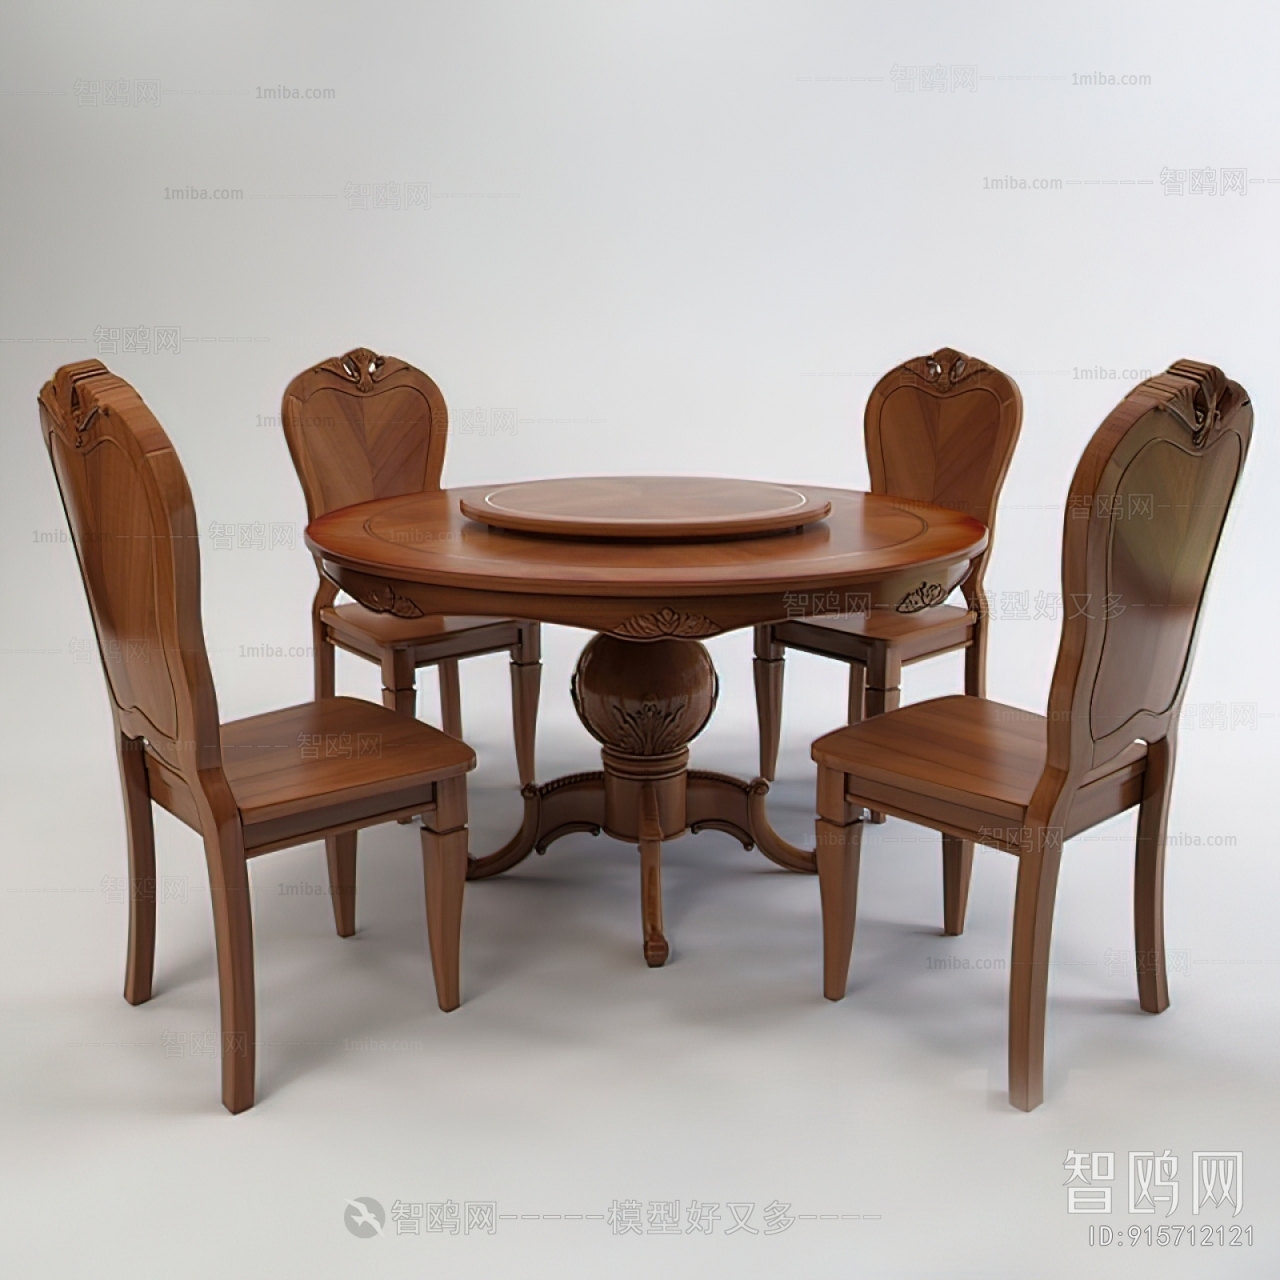 Retro Style Dining Table And Chairs